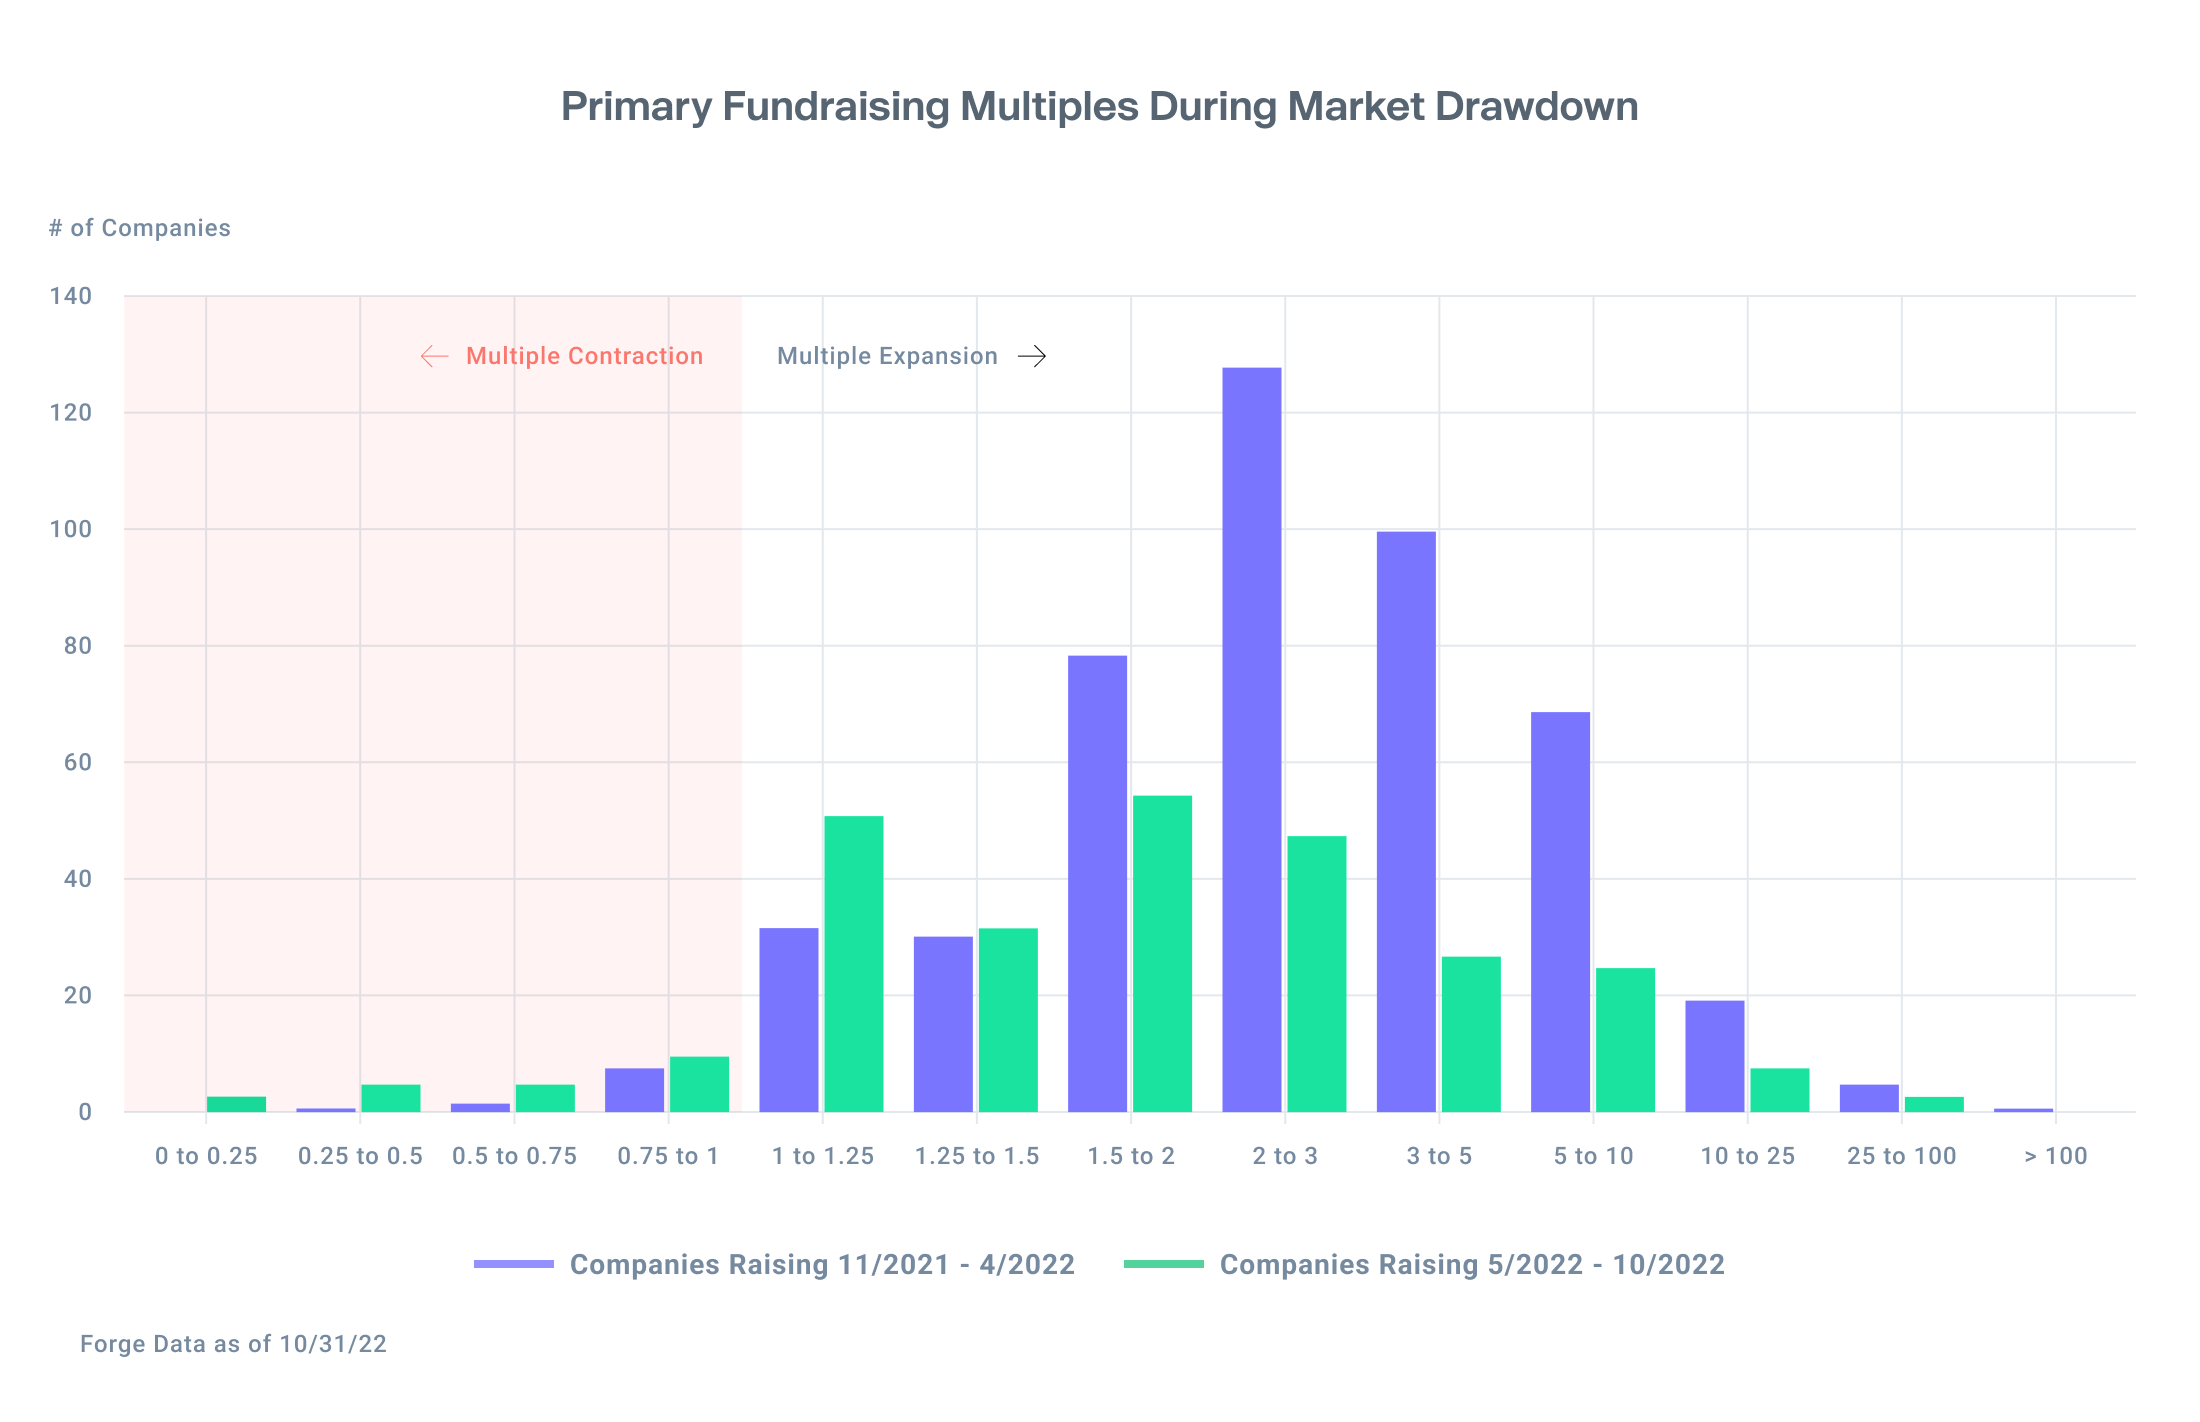 Bar chart showing primary fundraising multiples during the first six months of Market drawdown vs second six month according to Forge Data